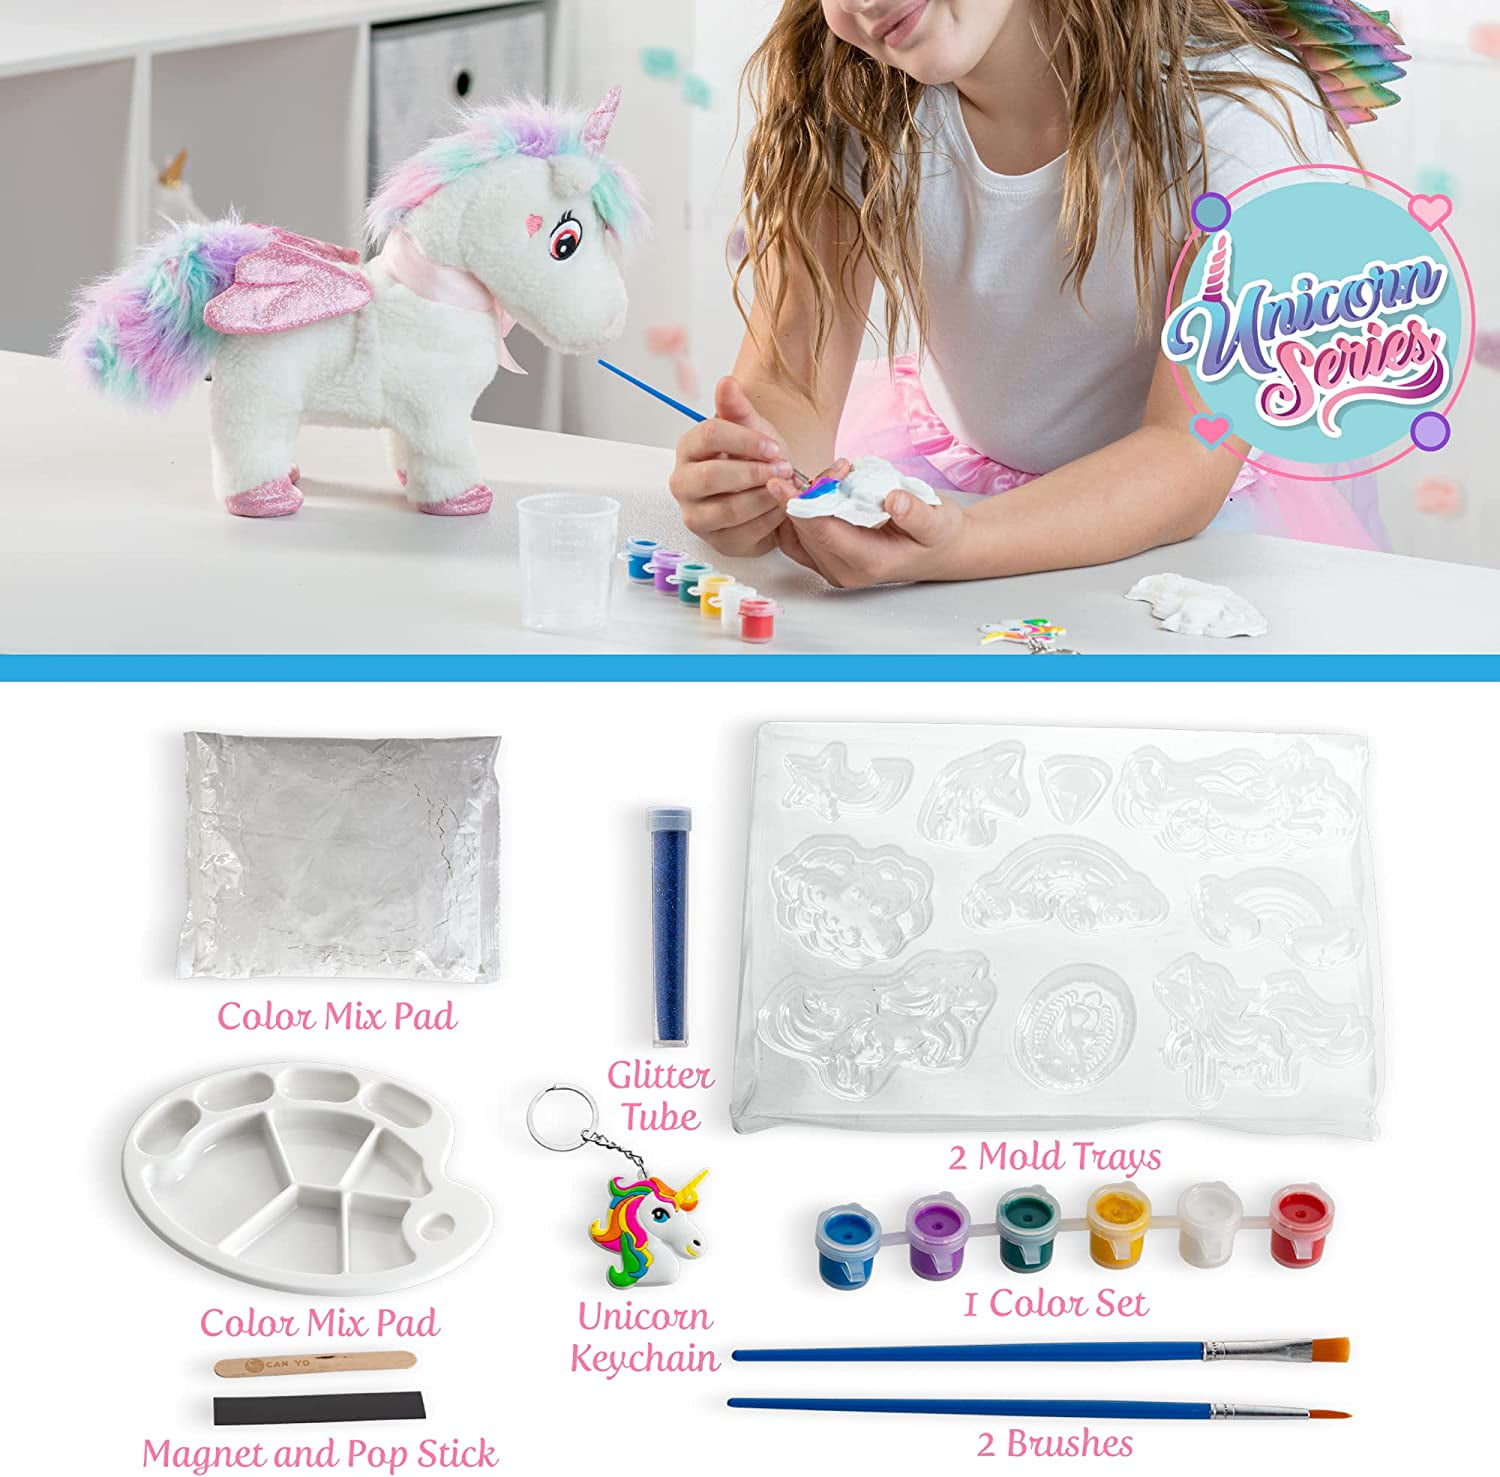 Unicorns gifts for girls unicorn toys for 3 year old girls and up  multifunction remote control unicorn costumes for girls DIY painting kit  crafts for kids birthday gift for girls ages 3